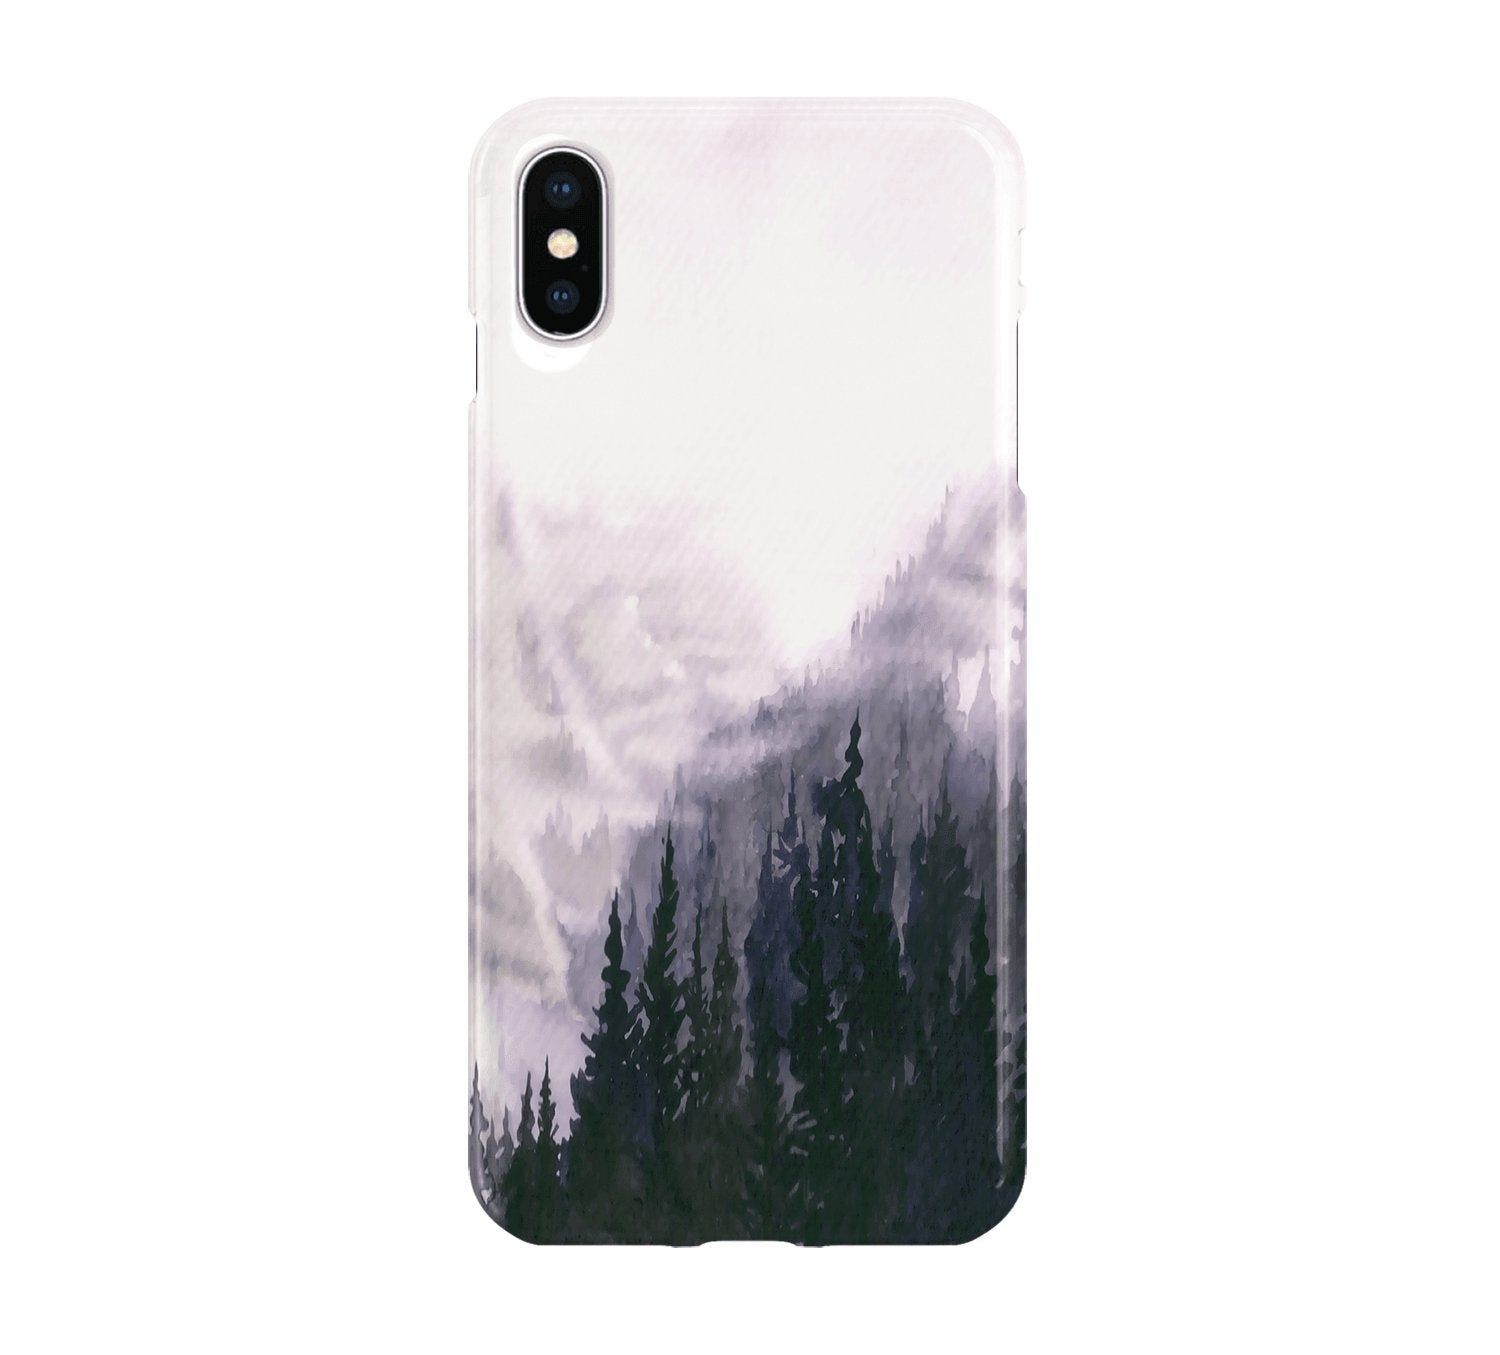 Foggy Morning - iPhone phone case designs by CaseSwagger